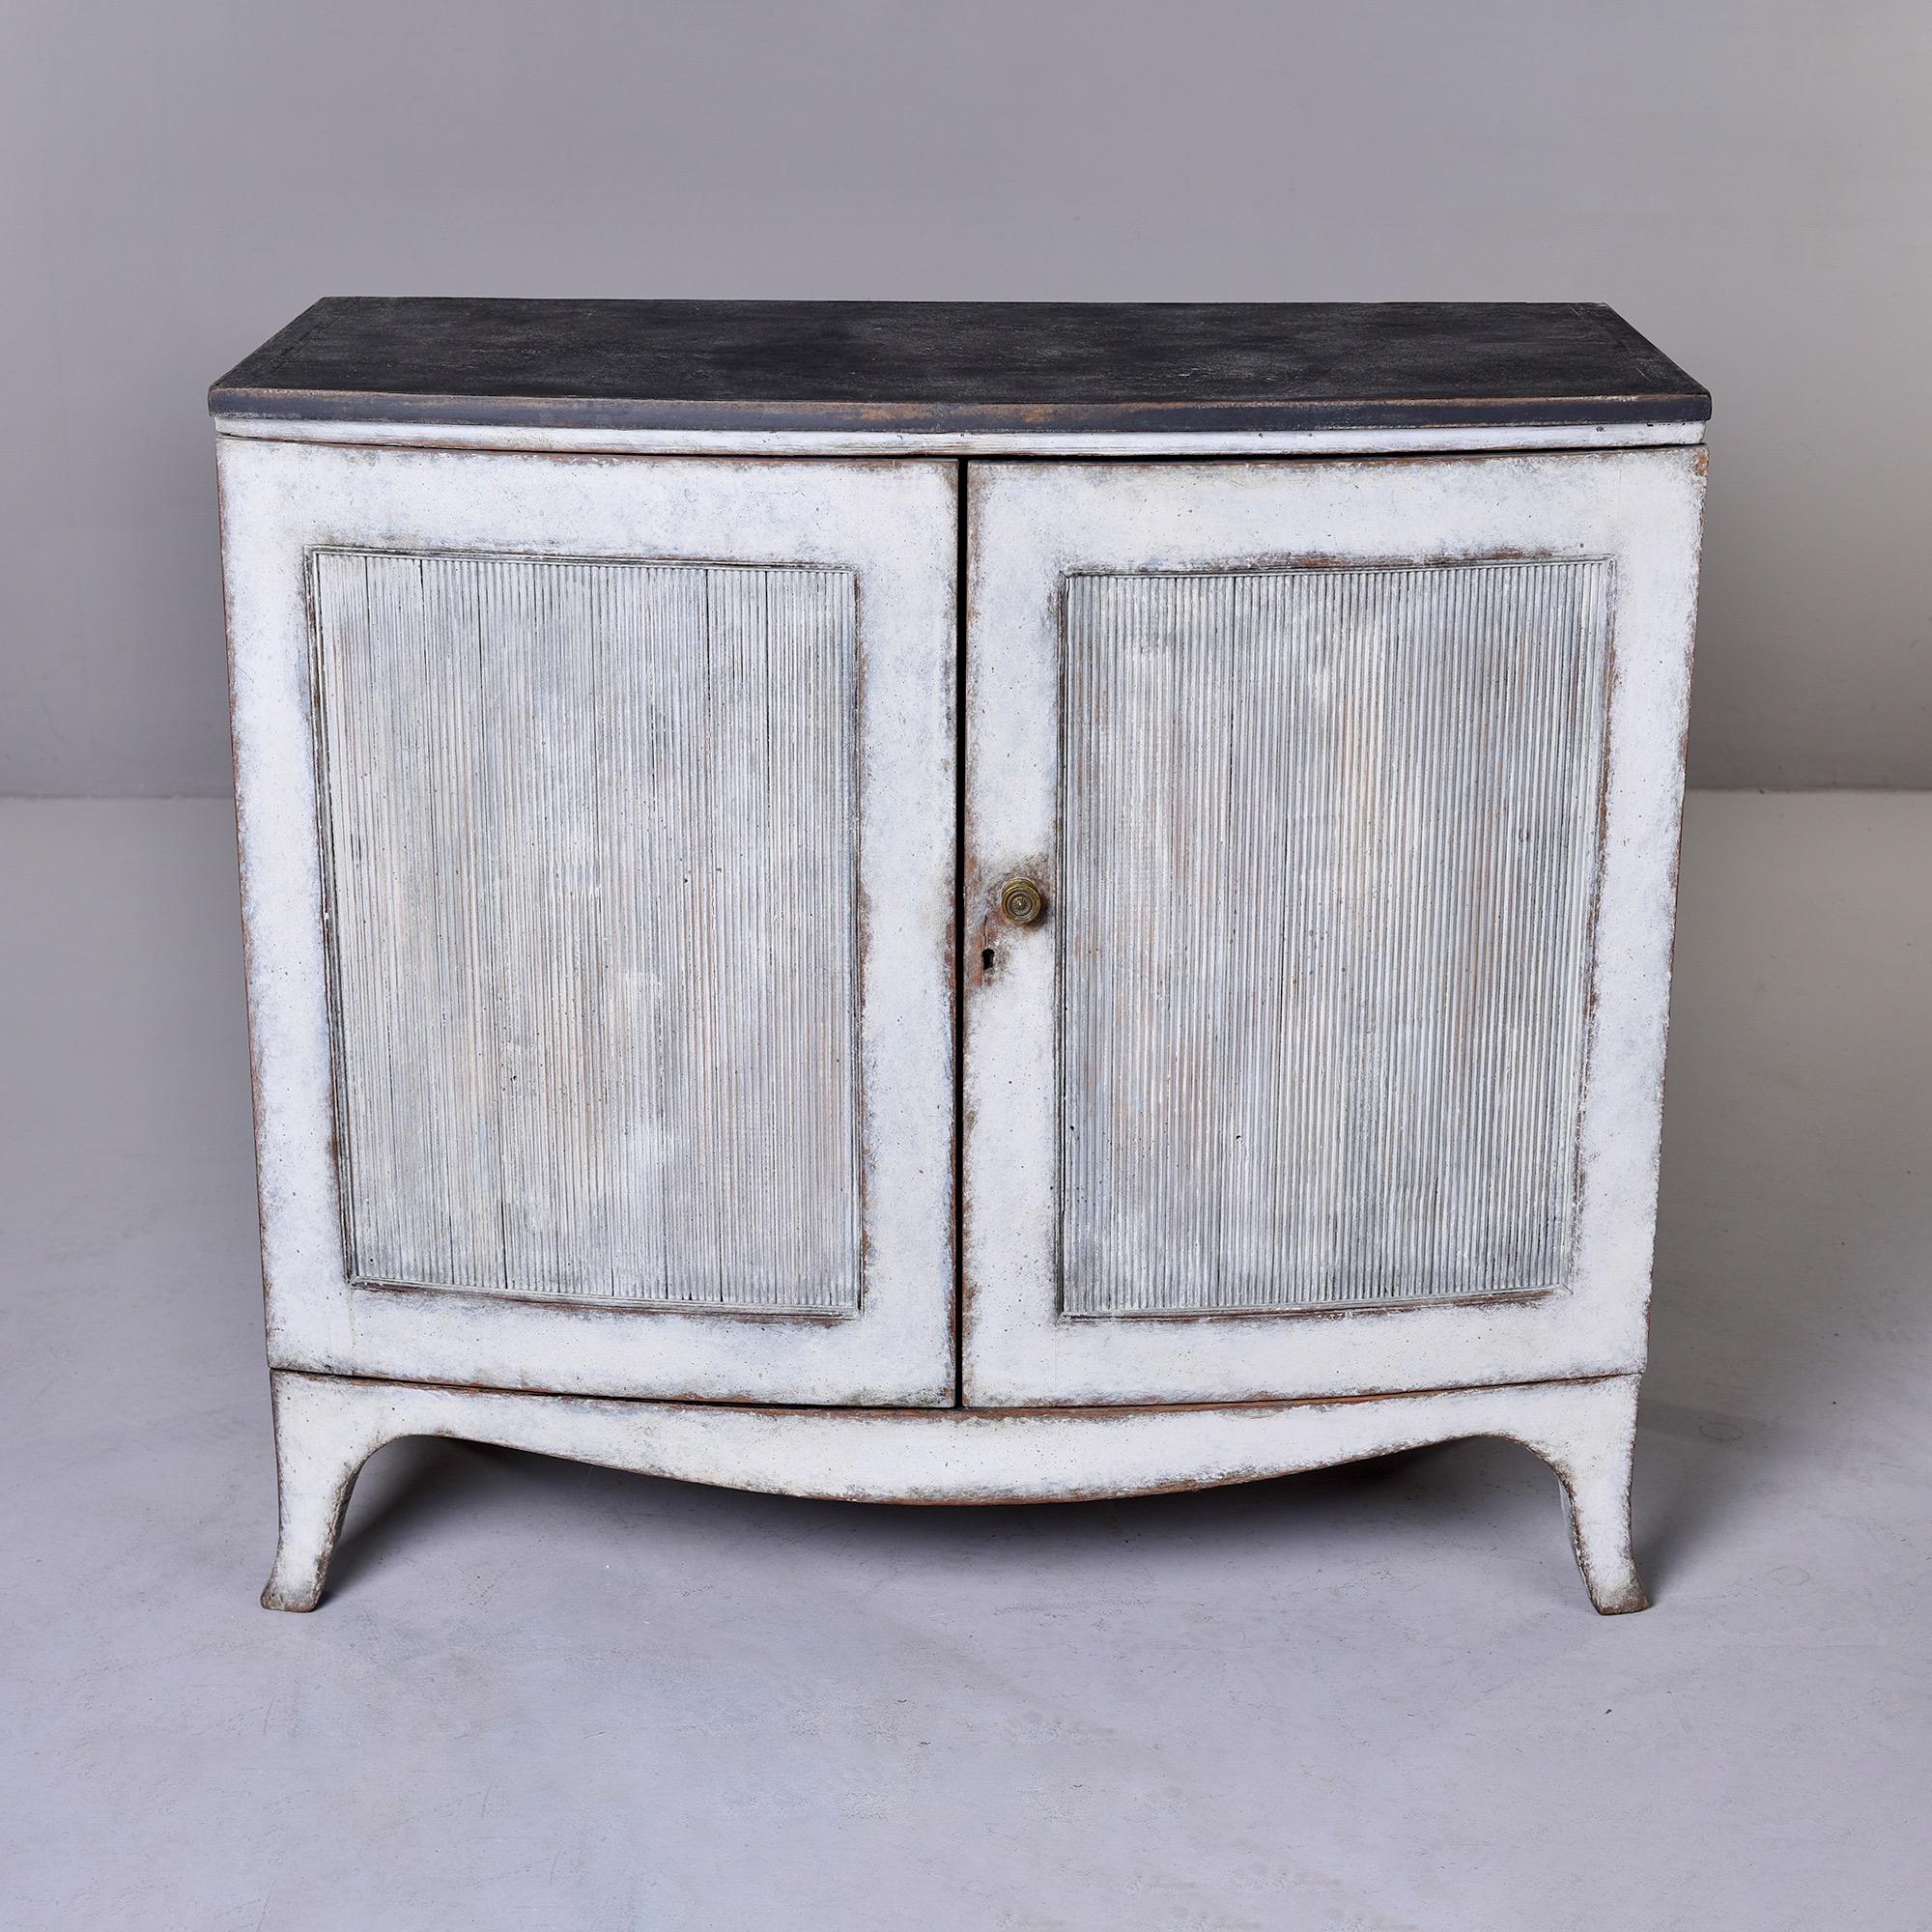 Found in England, this circa 1920s two door cabinet or chest has a soft black painted top with the rest of the cabinet finished in a contrasting soft white with gray undertone. Two hinged doors have reeded panels in the center and open to two fixed